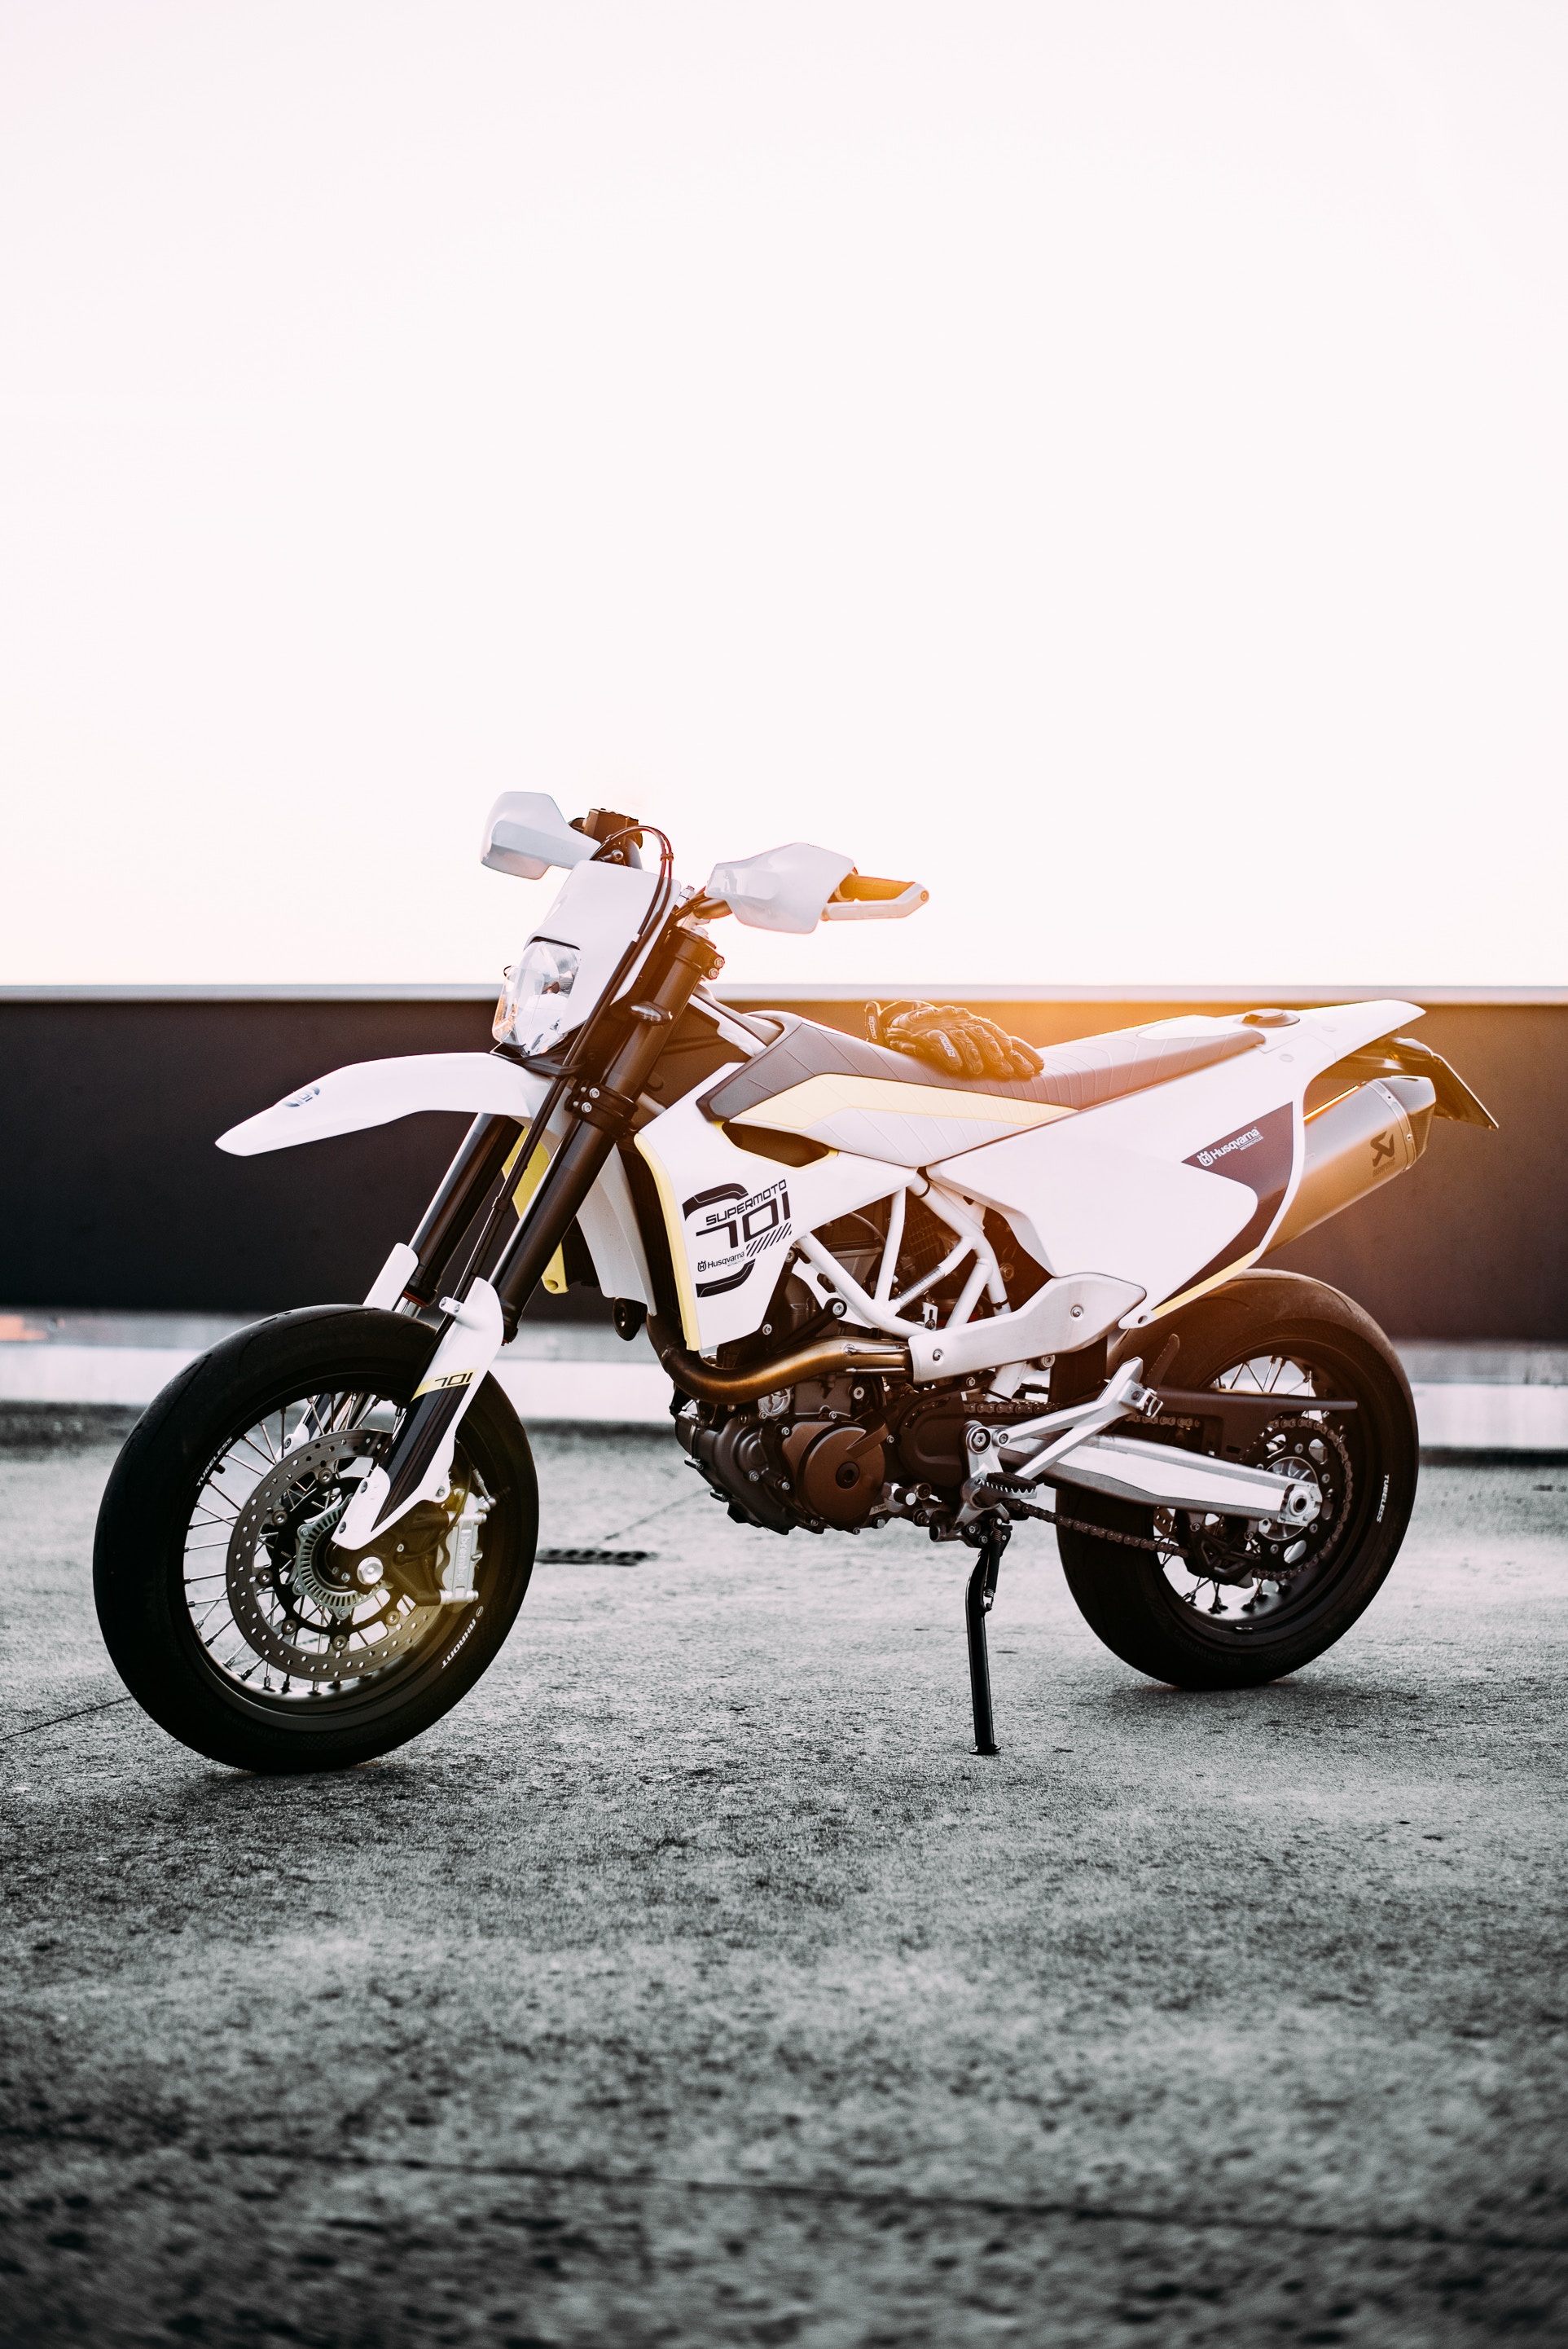 side view, motorcycles, white, motorcycle Full HD